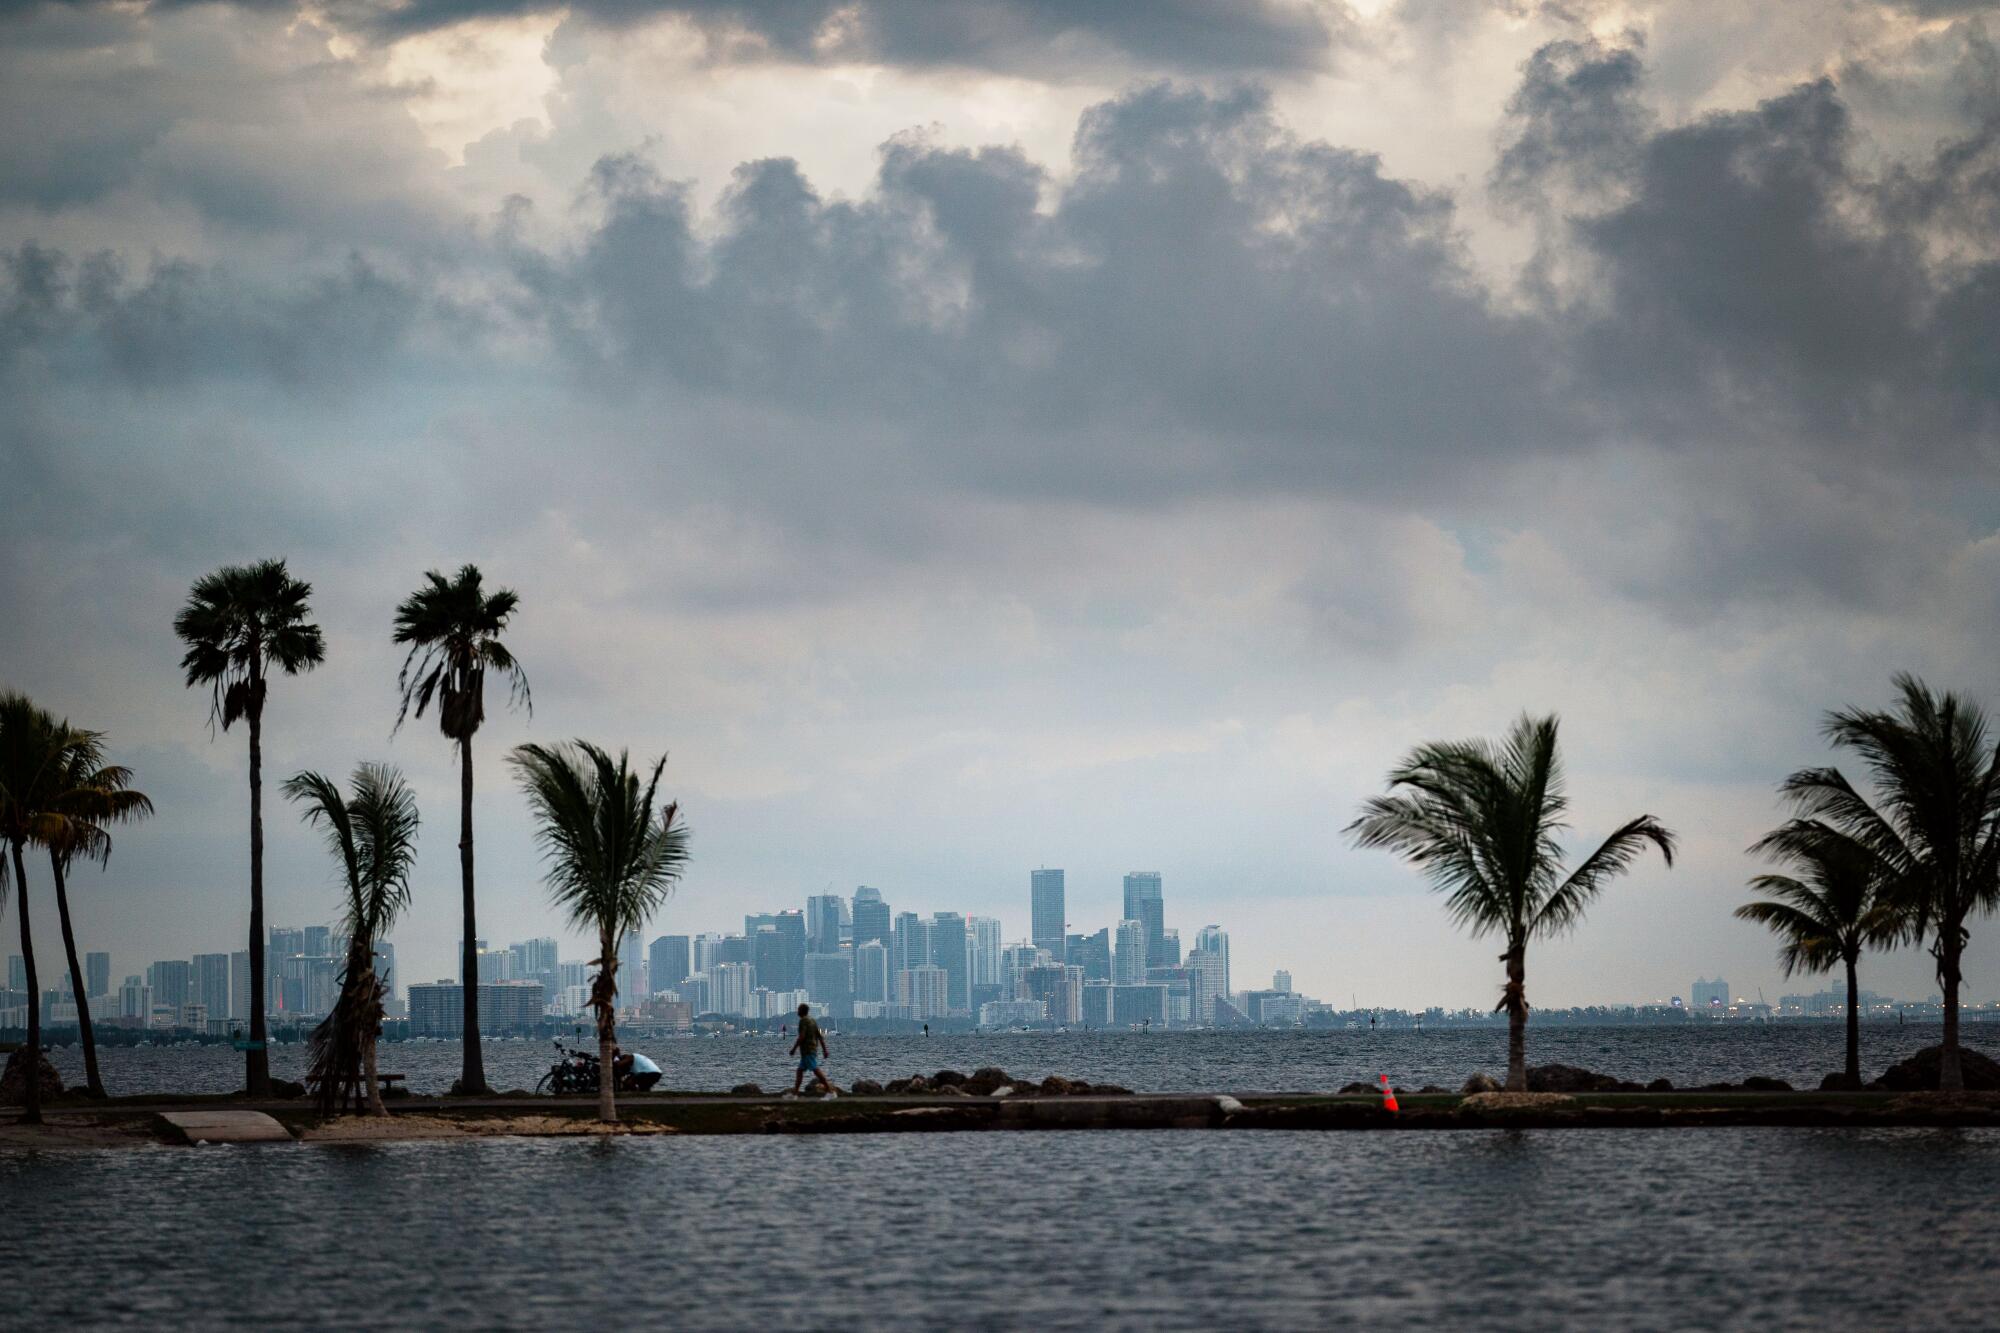 A lone person walks on a thin strip of land with palm trees surrounded by water. The Miami skyline is on the horizon.